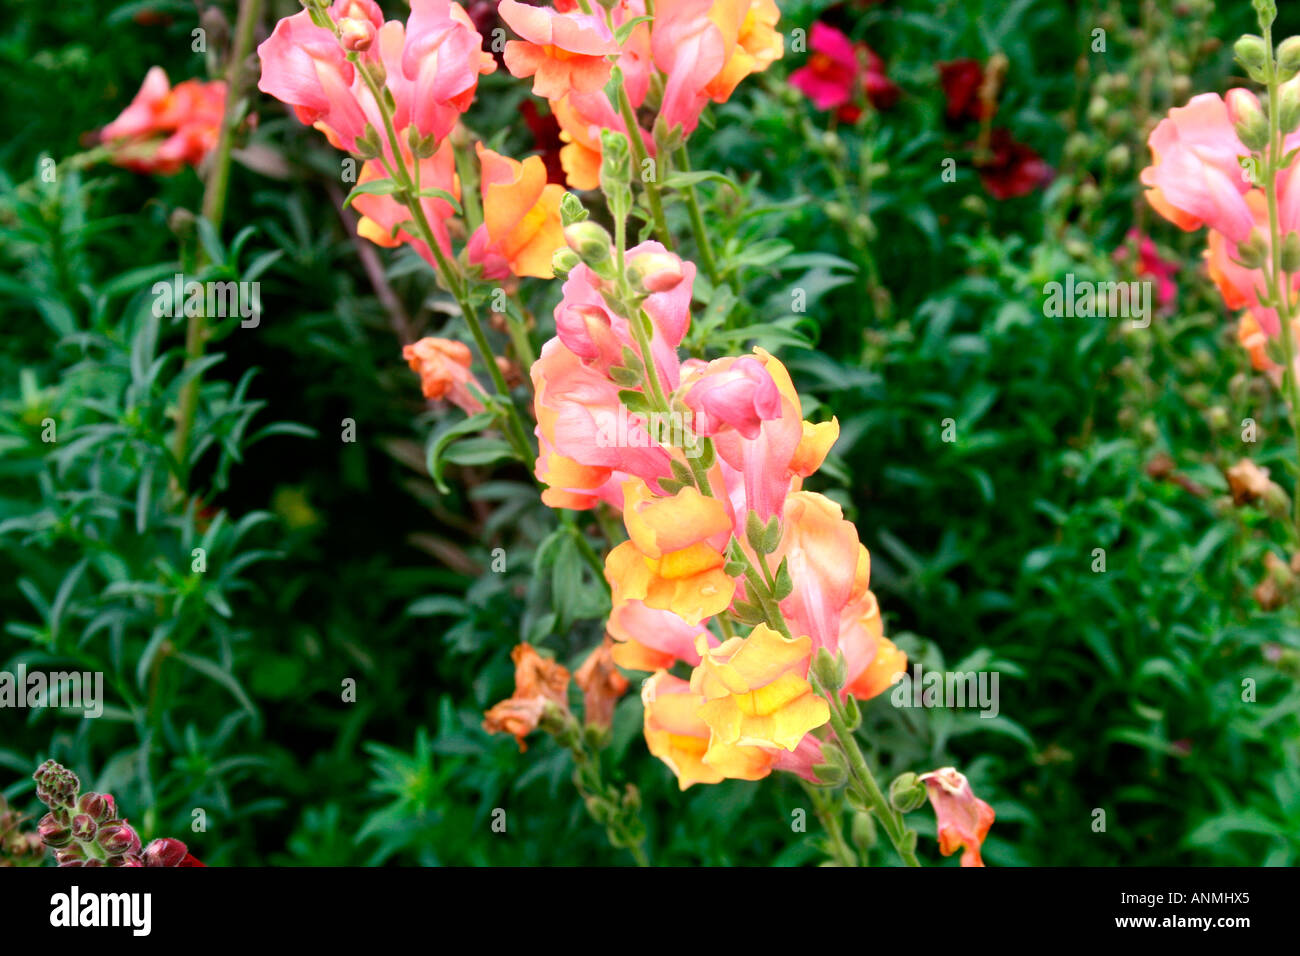 Close up of a stalk of yellow and pink flowers in a garden in Munnar, Kerala Stock Photo